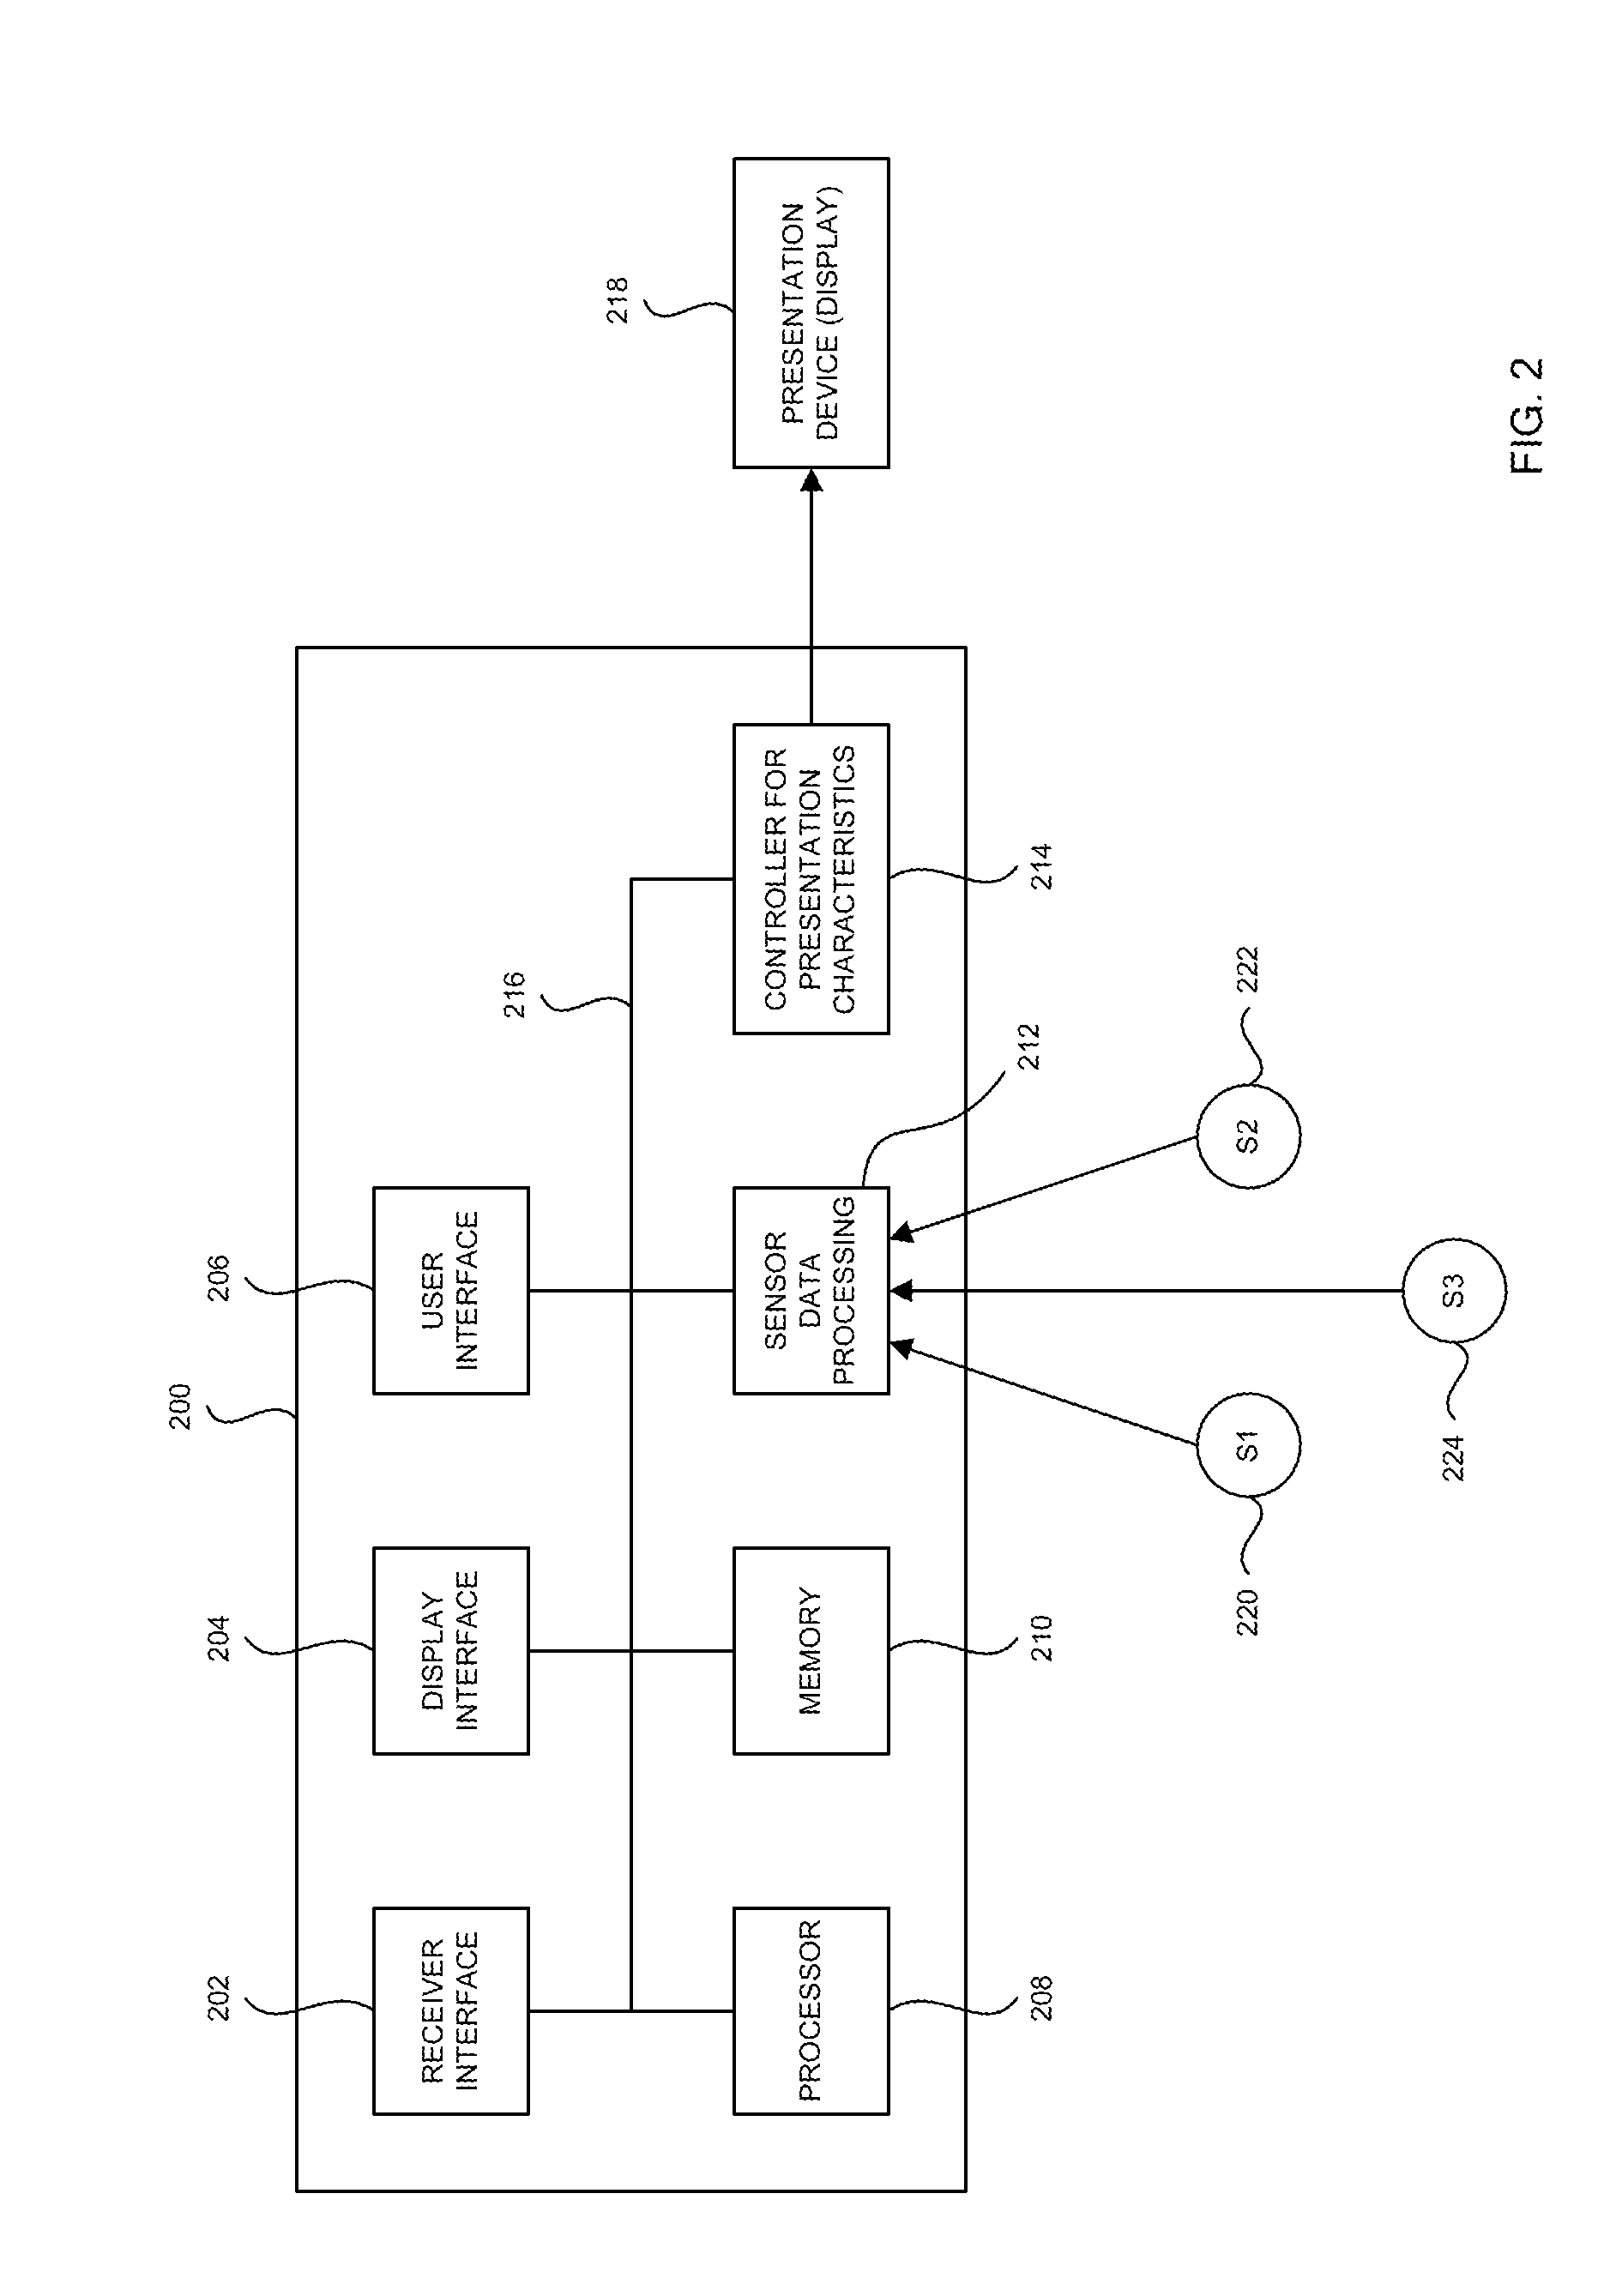 System and method for adjusting presentation characteristics of audio/video content in response to detection of user sleeping patterns